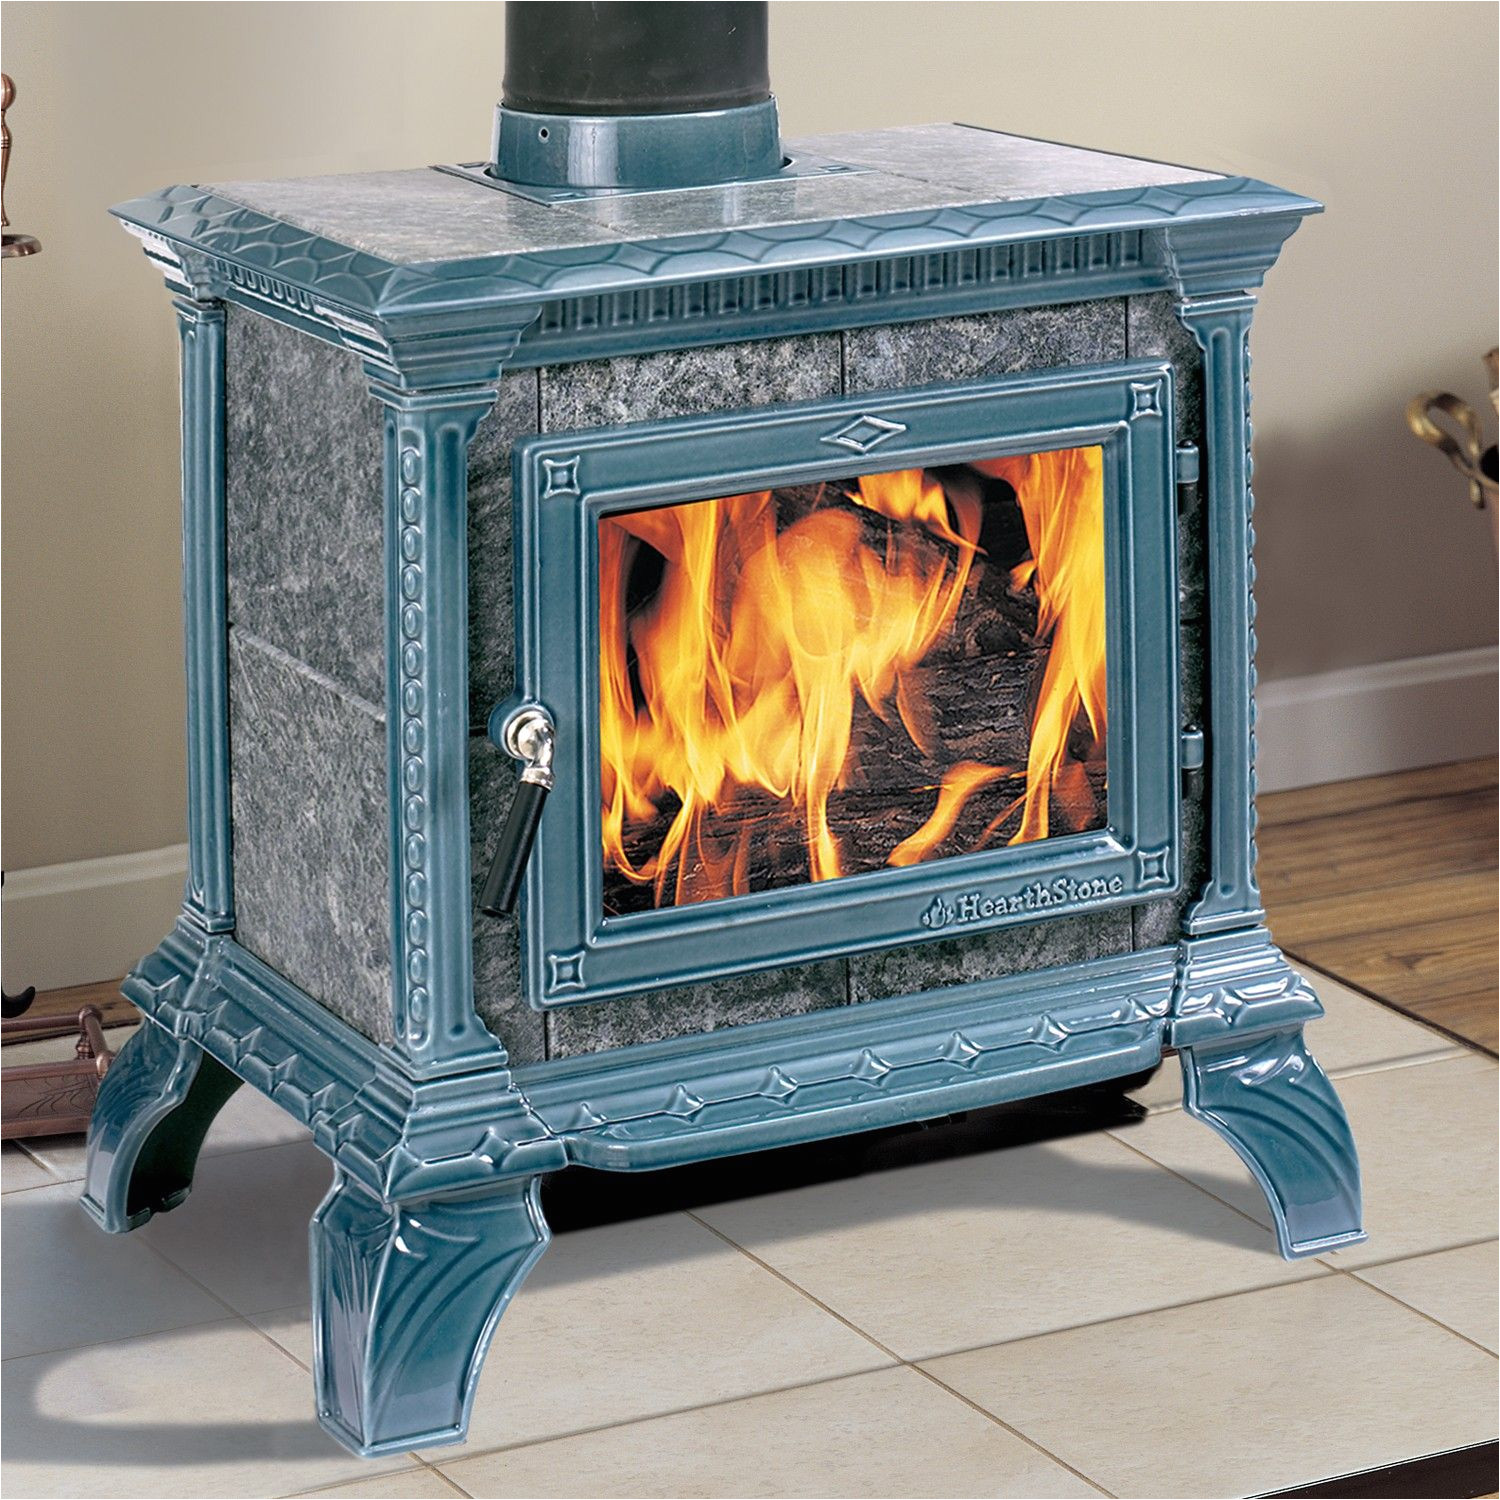 Hearthstone Wood Burning Stove Parts the Tribute is Designed to Satisfy the Customer who Loves the Style